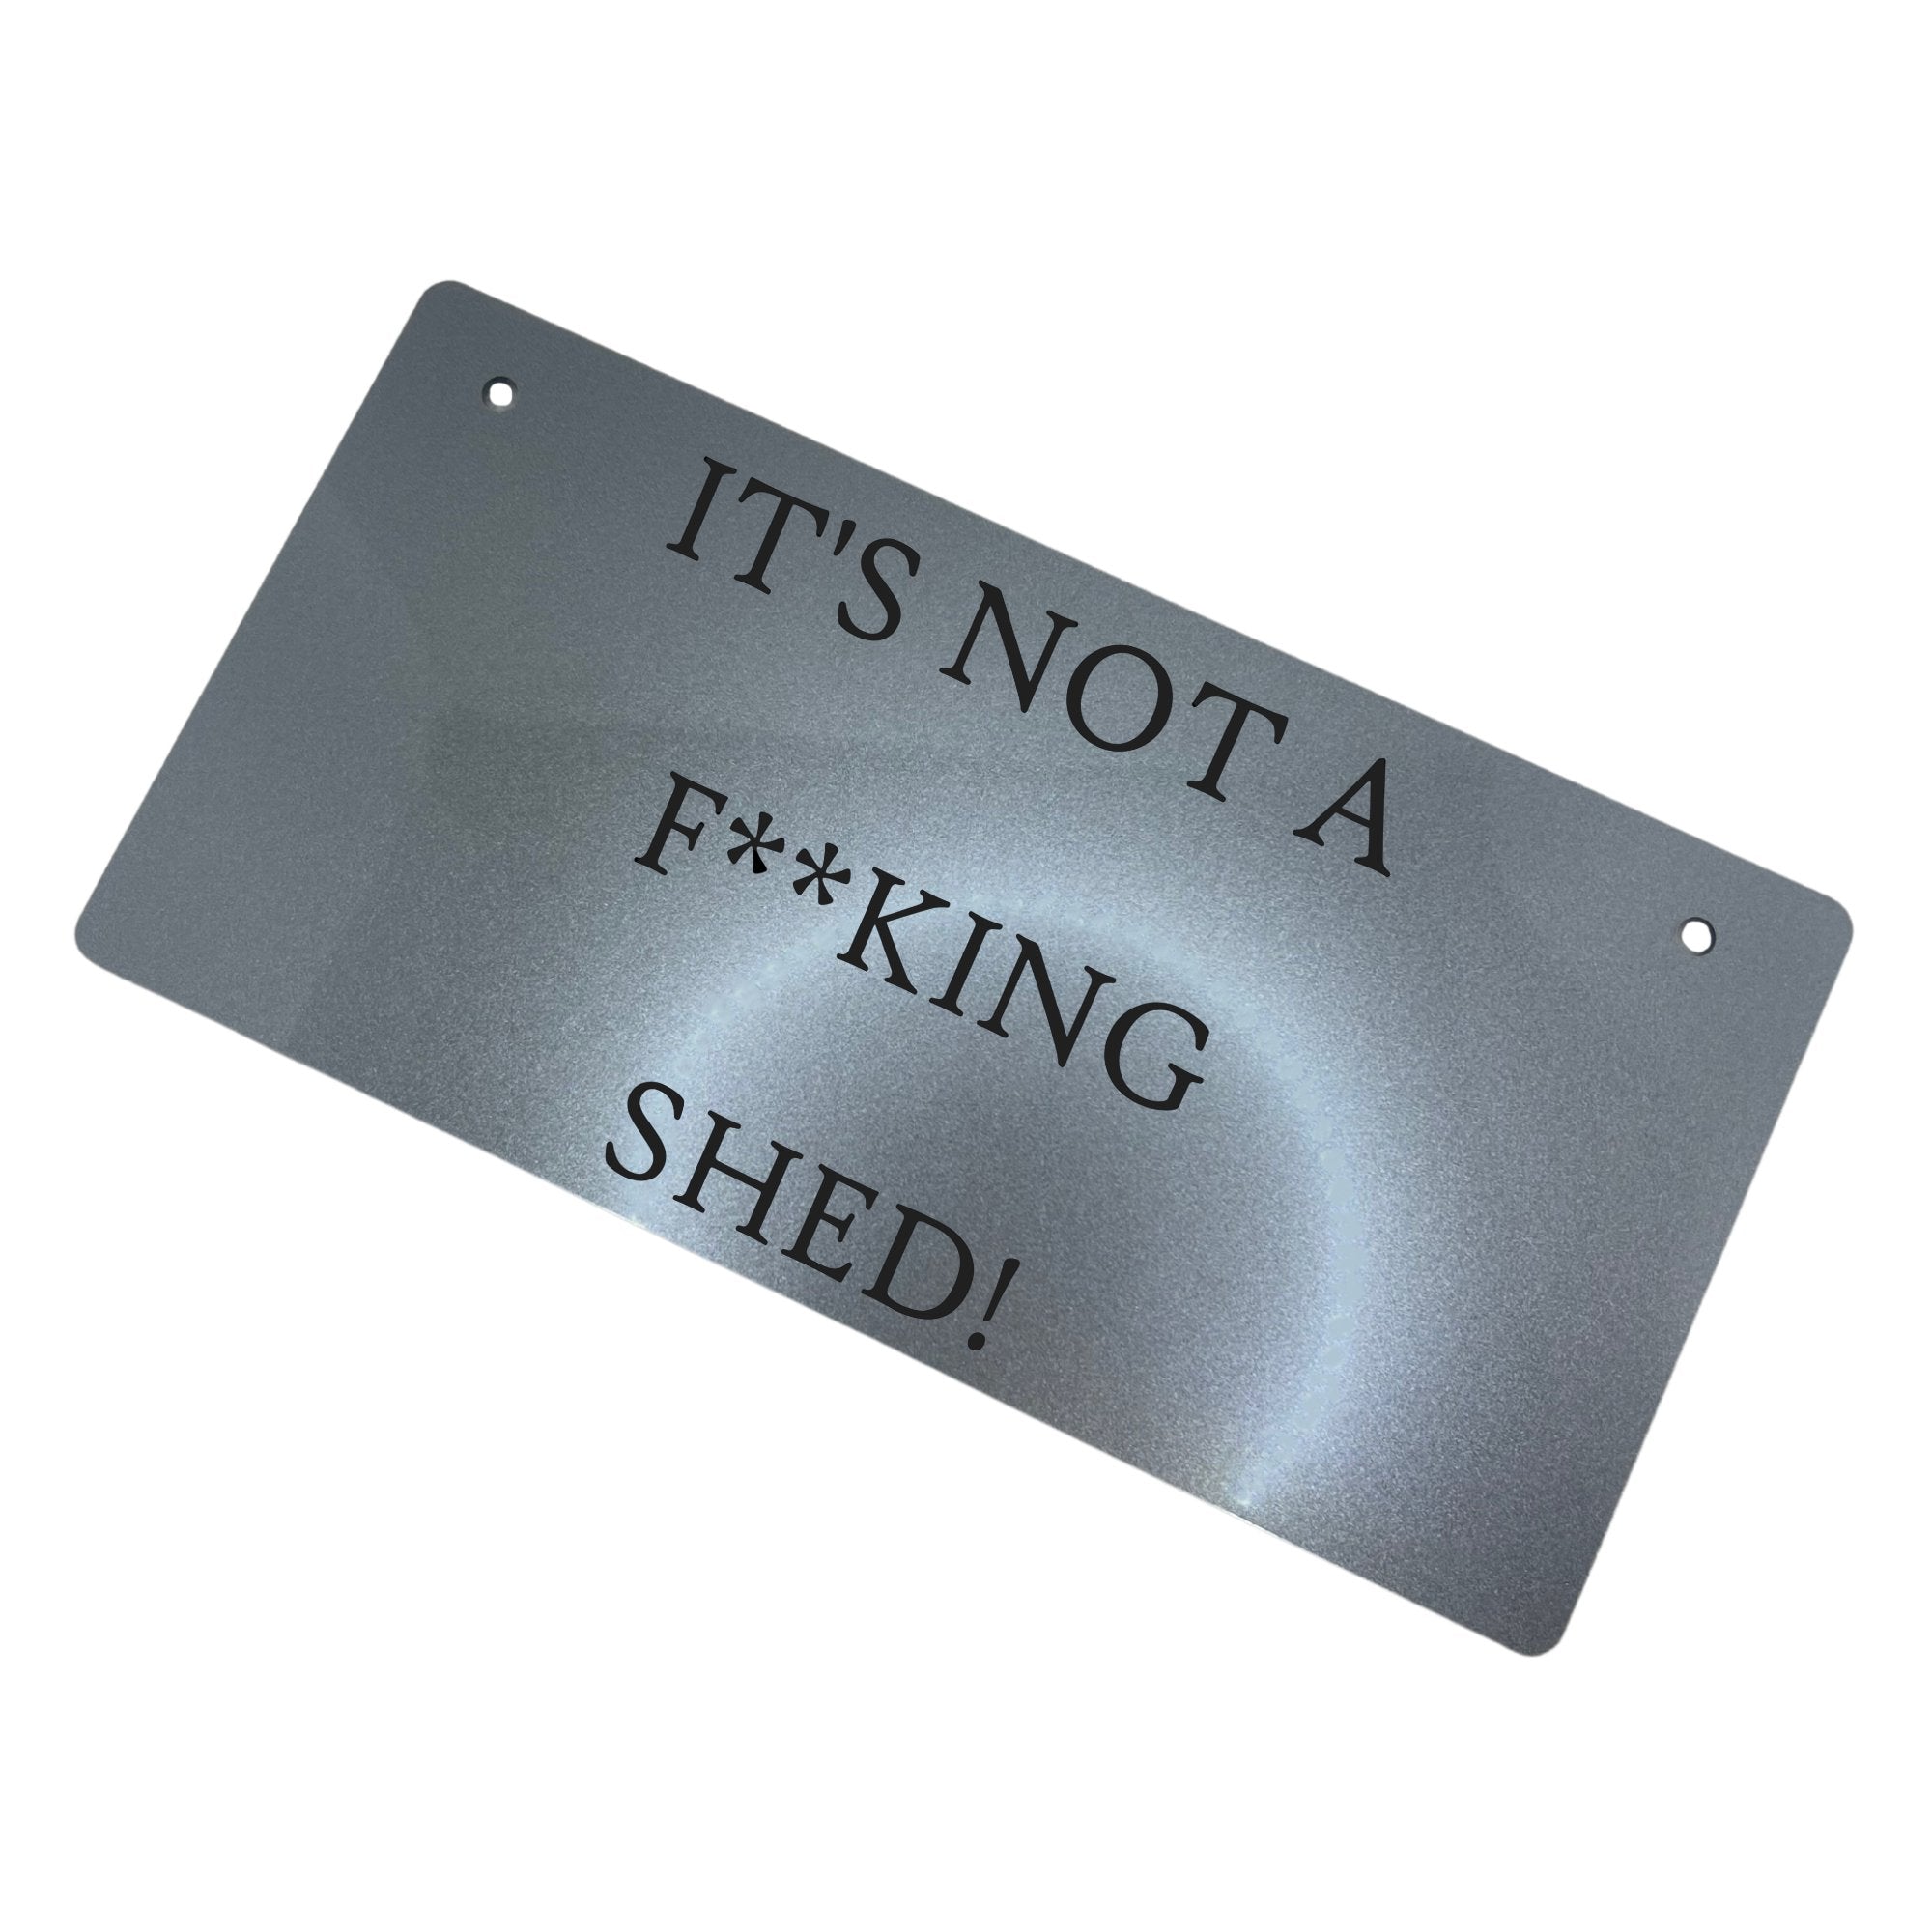 Alt Text: "'IT'S NOT A FKING SHED' Sign in Silver Color" Description: Close-up of a silver-colored acrylic sign with engraved text saying "IT'S NOT A FKING SHED." The sign is crafted from durable 3mm thick acrylic and includes 5mm holes for convenient hanging.